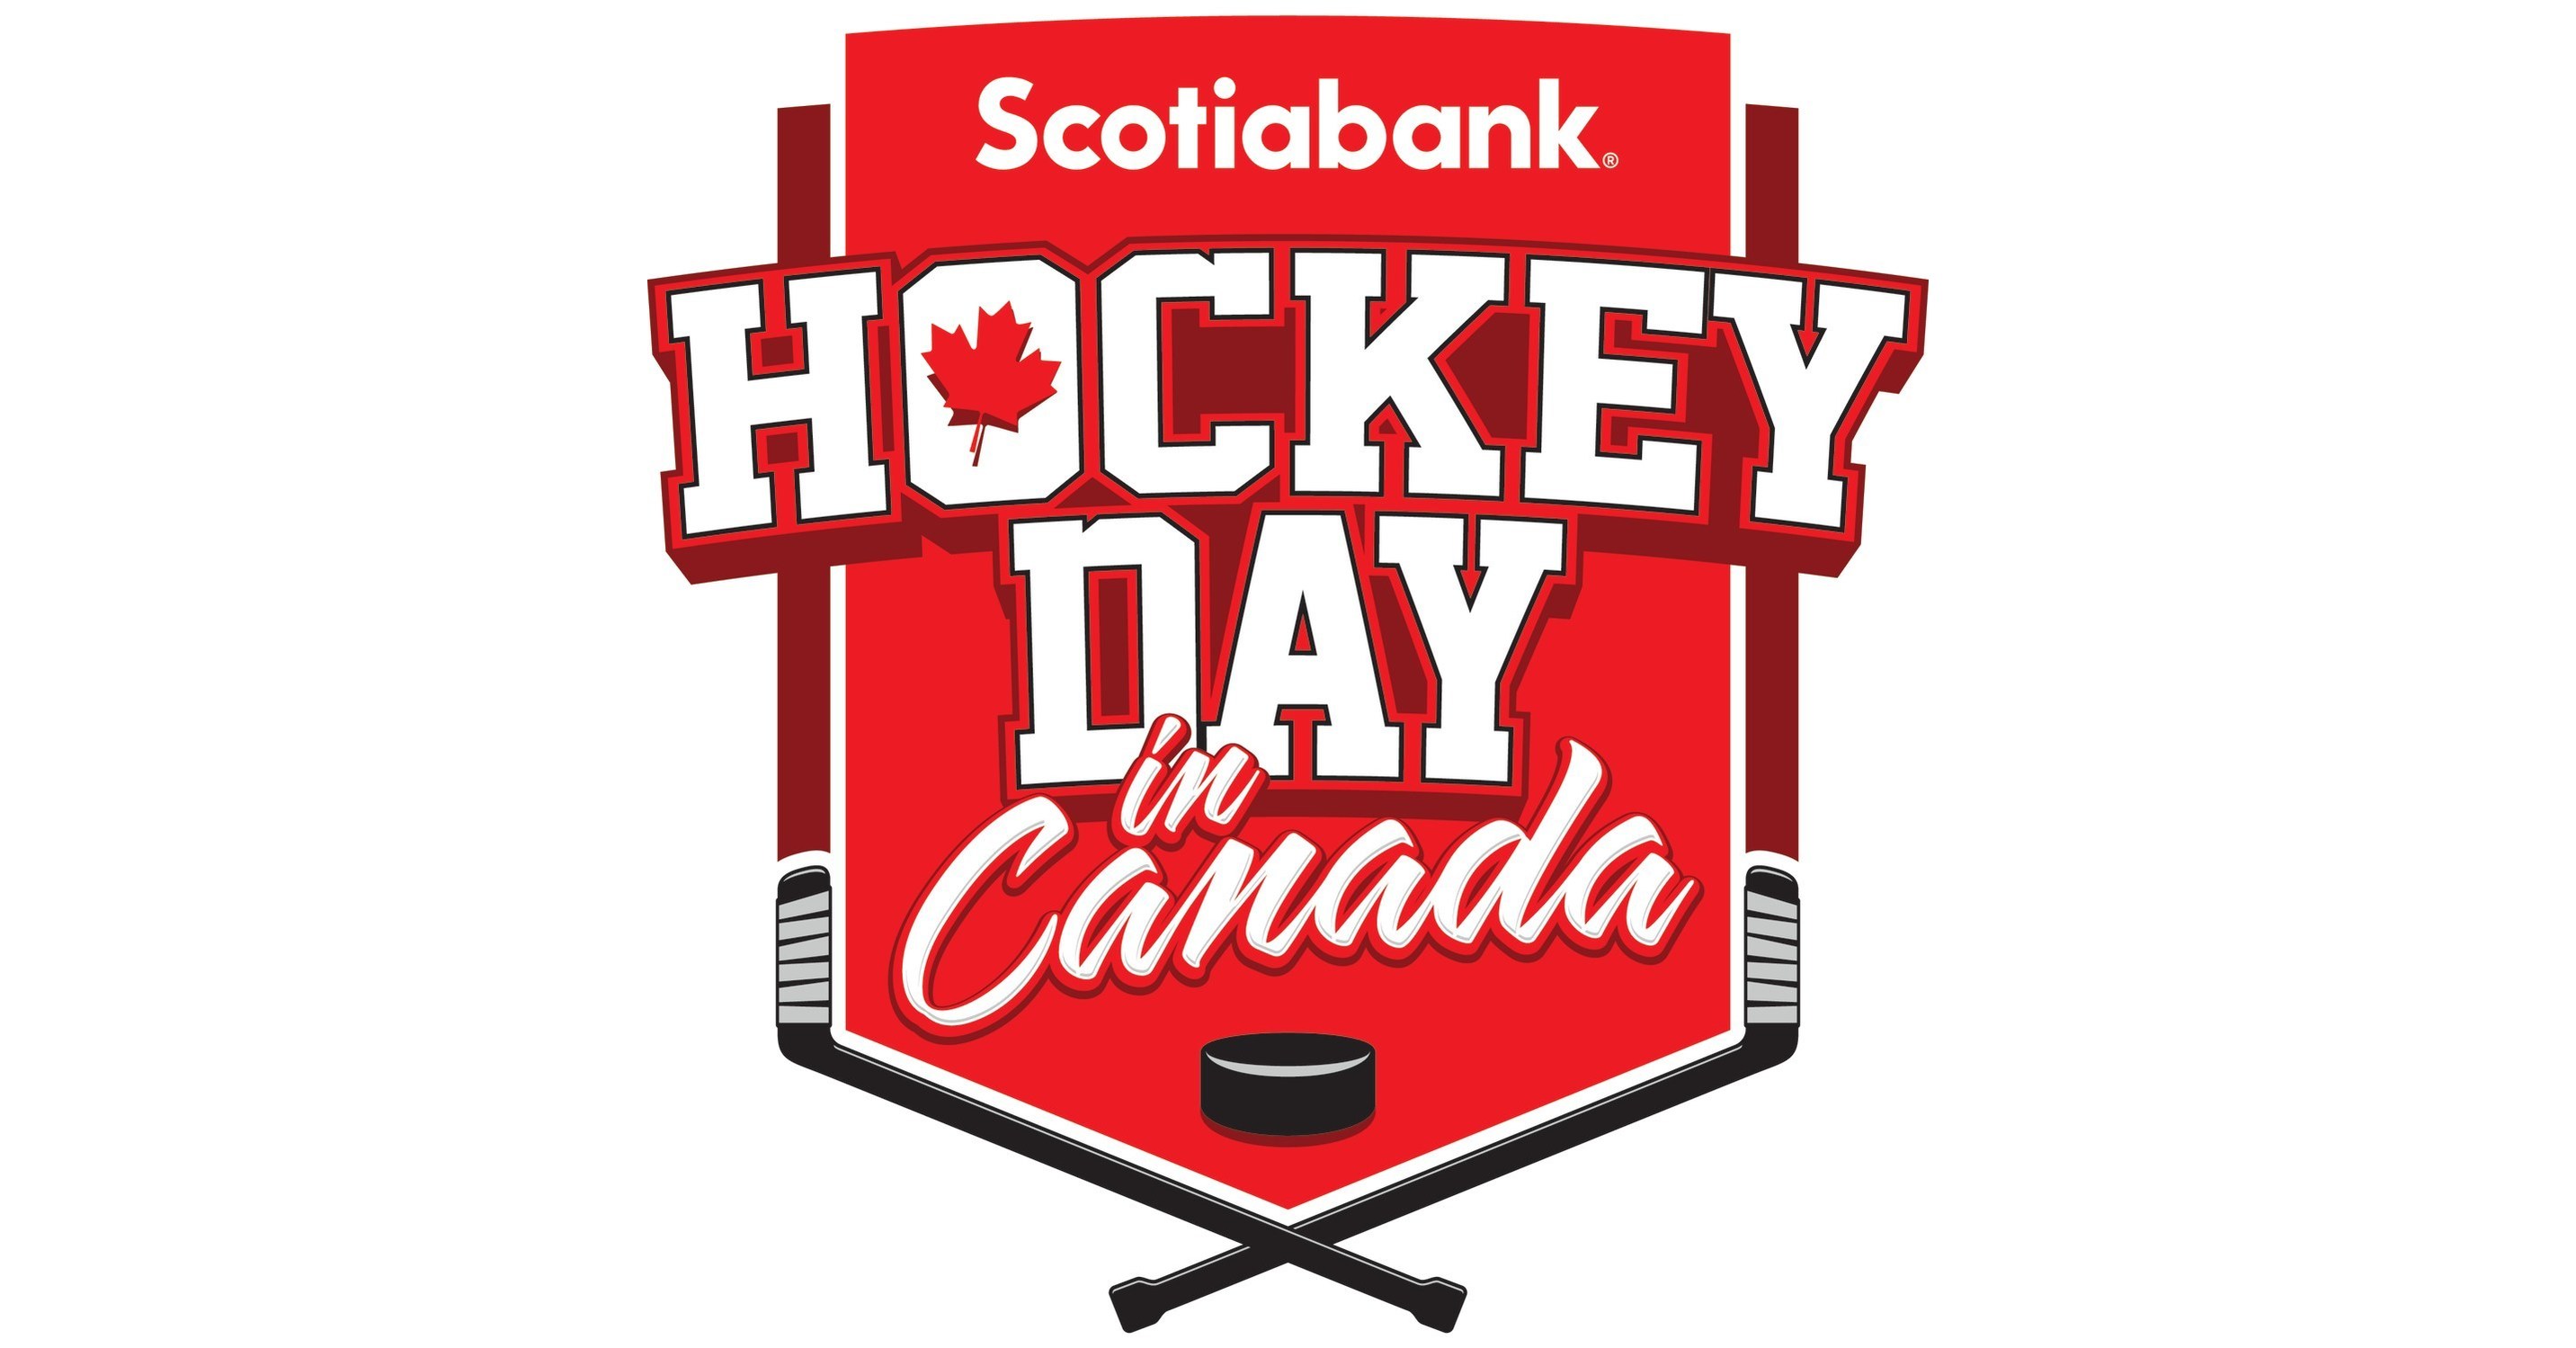 22nd Annual Scotiabank Hockey Day in Canada Endeavours to Break Down